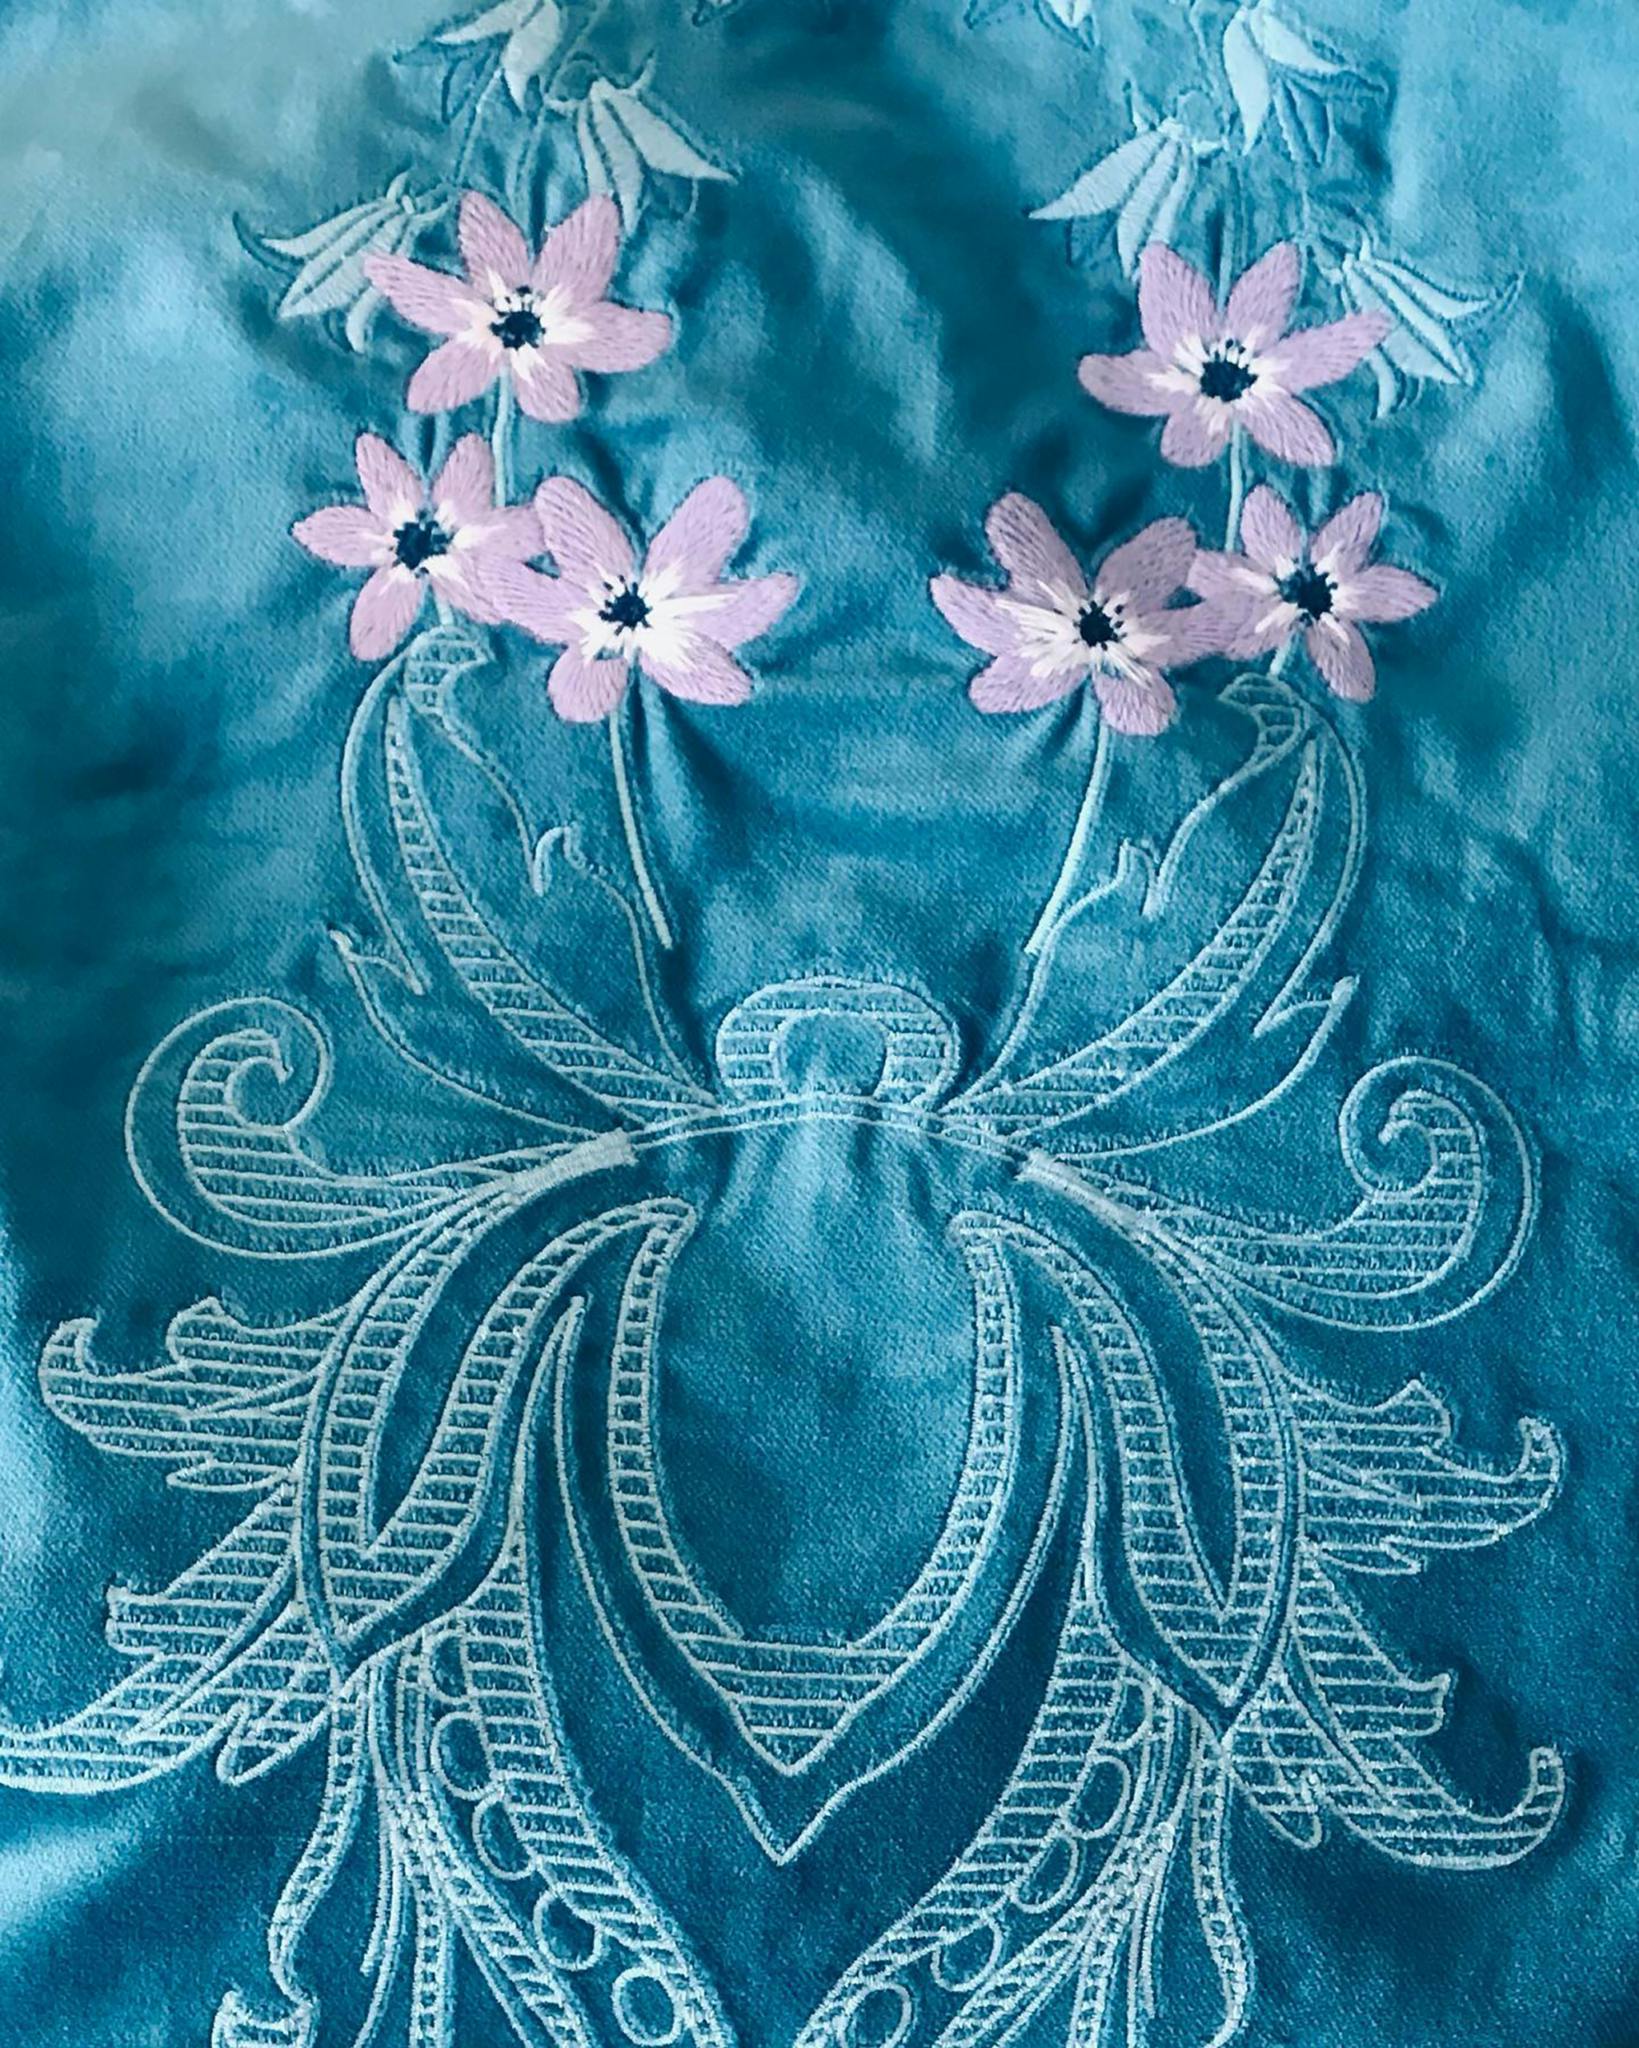 A close up of Katie Furzer's embroidery work featuring blue silk and a pattern designed with thread including pink floral details